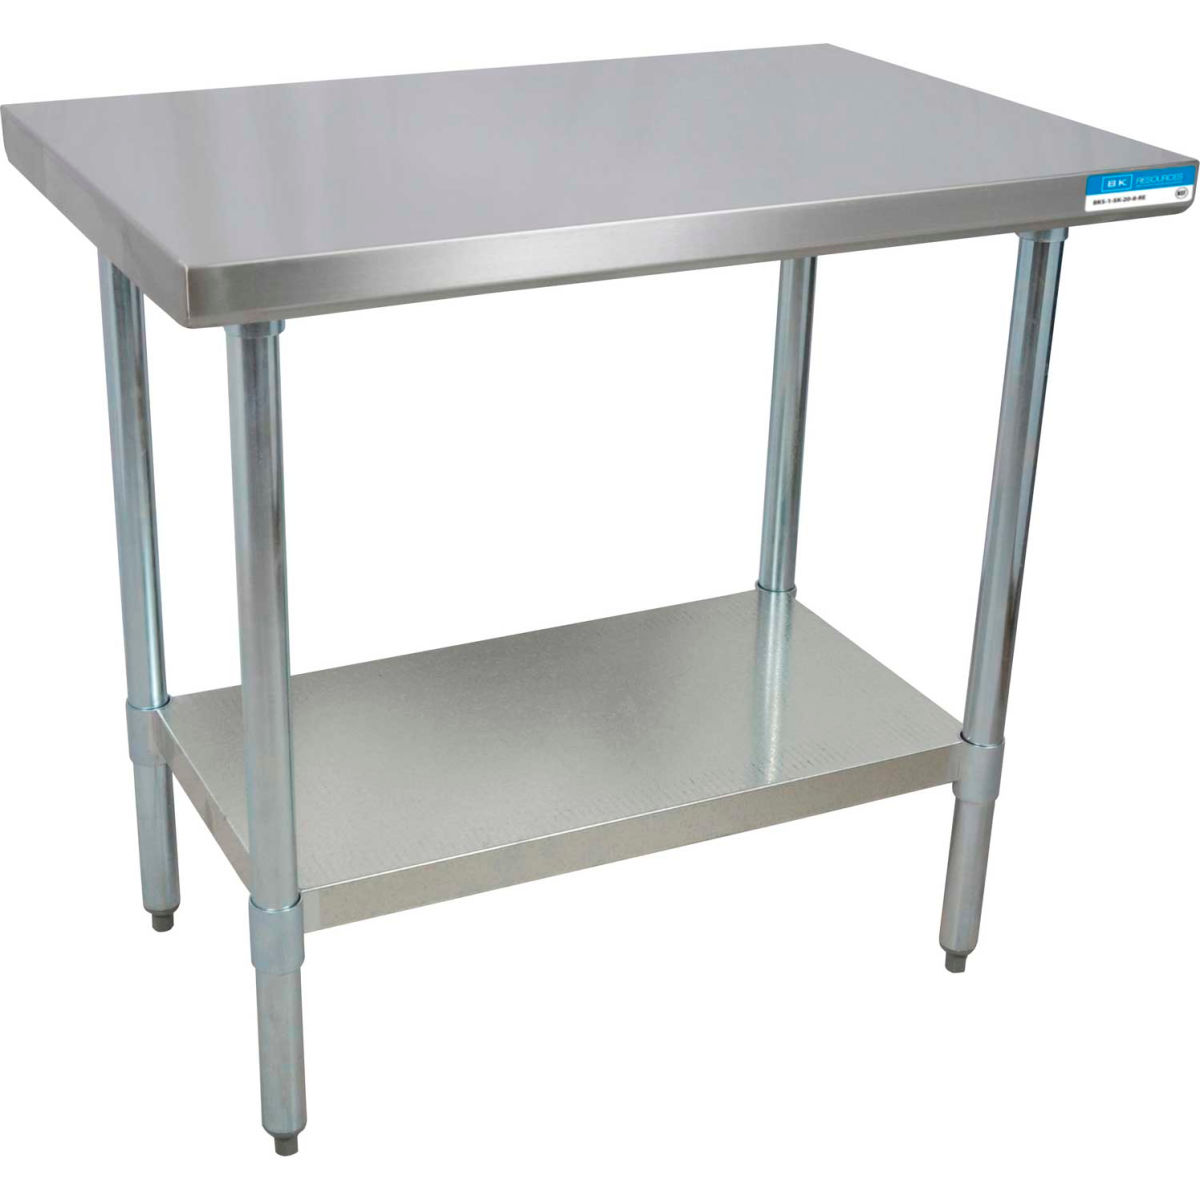 Picture of BK Resources B0899459 18 Gauge 430 Series Stainless & Galvanised Shelf Workbench with Undershelf - 48 x 18 in.